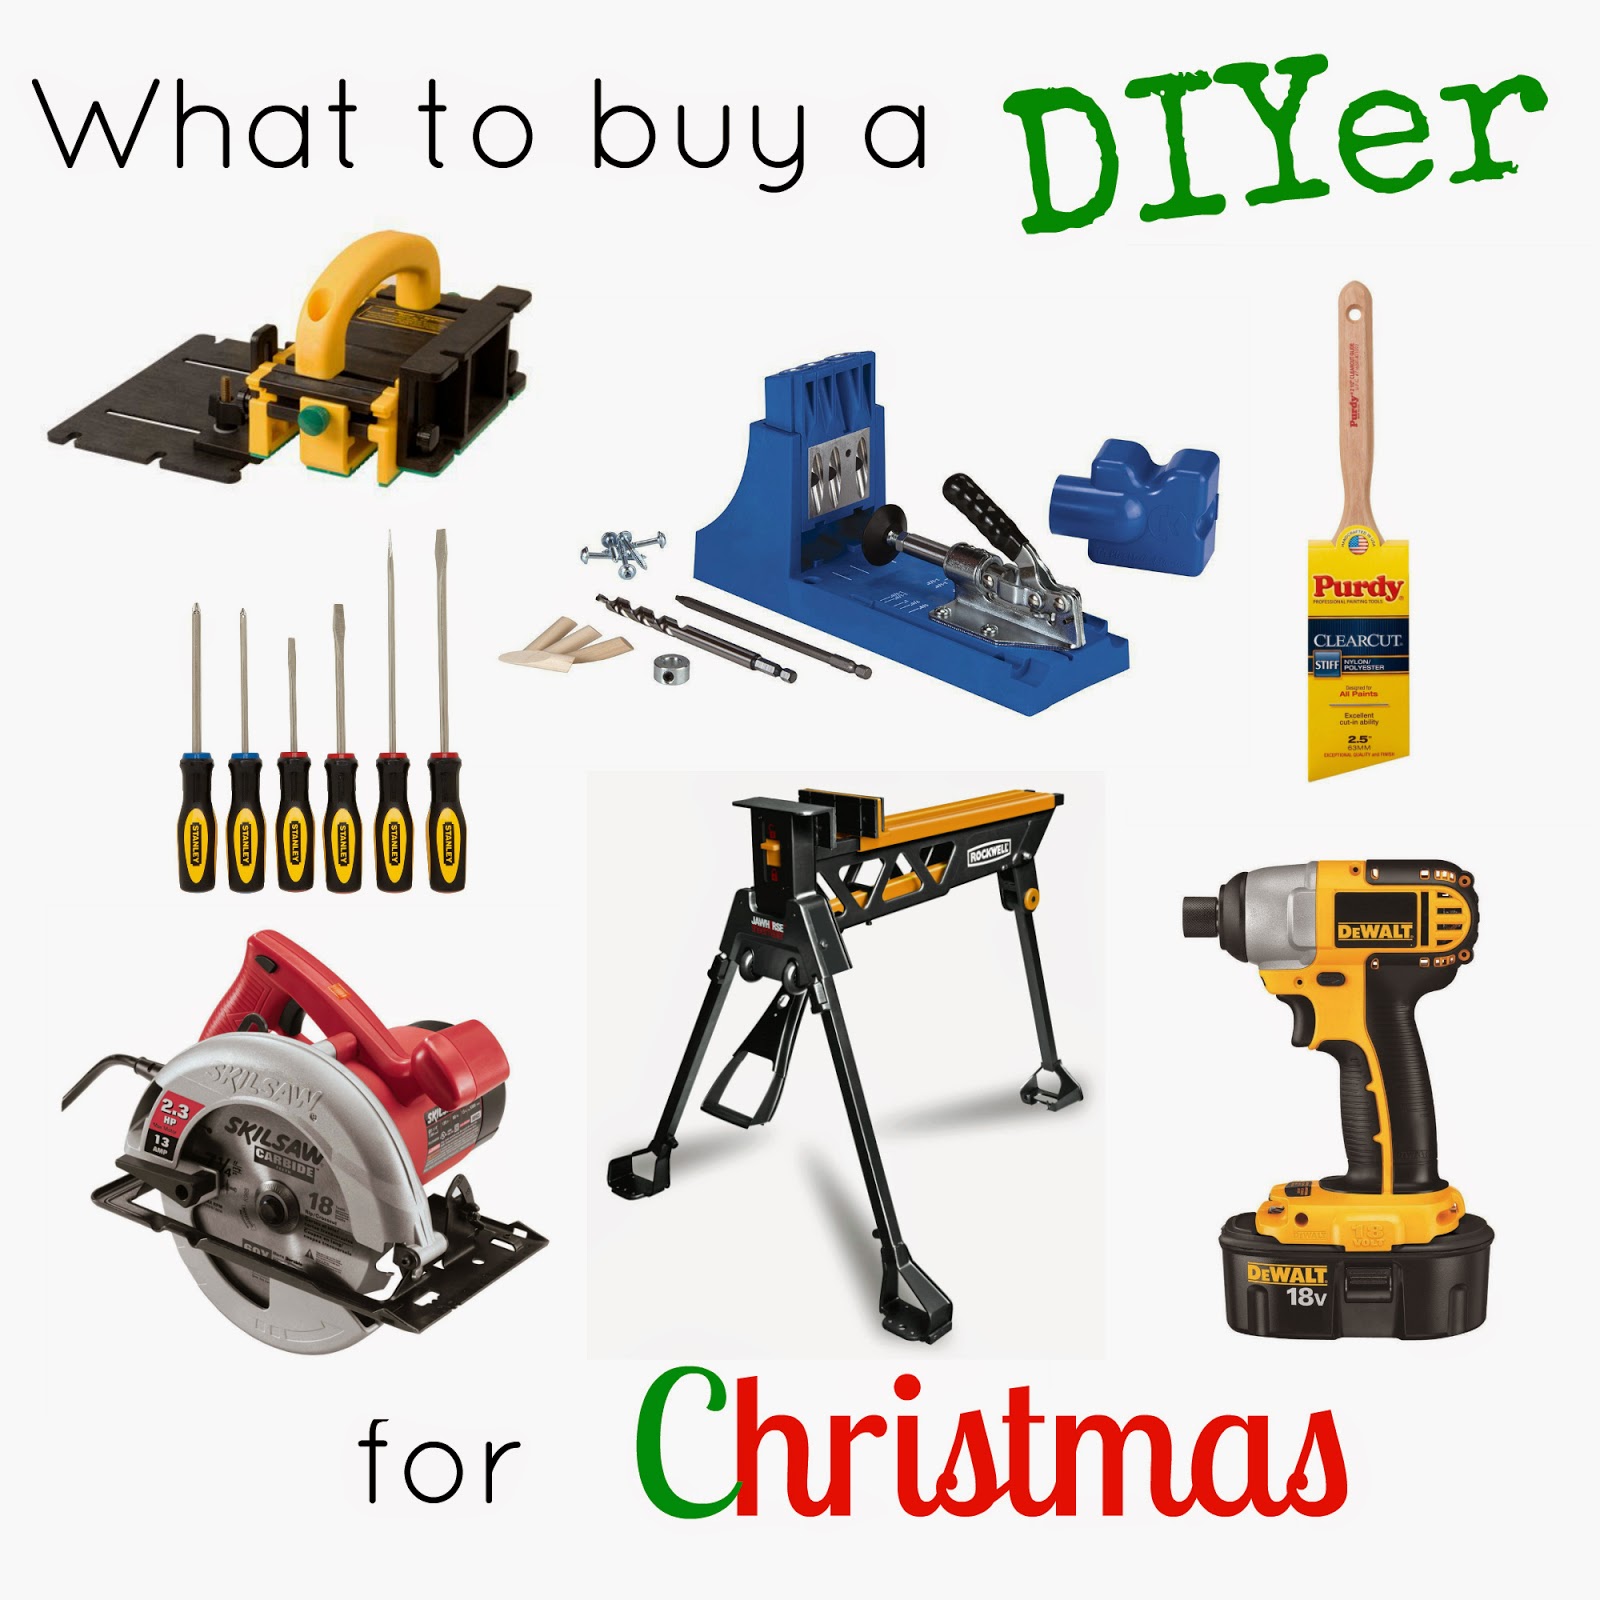 5 Must Have Tools For Every DIYer's Christmas List - The DIY Life